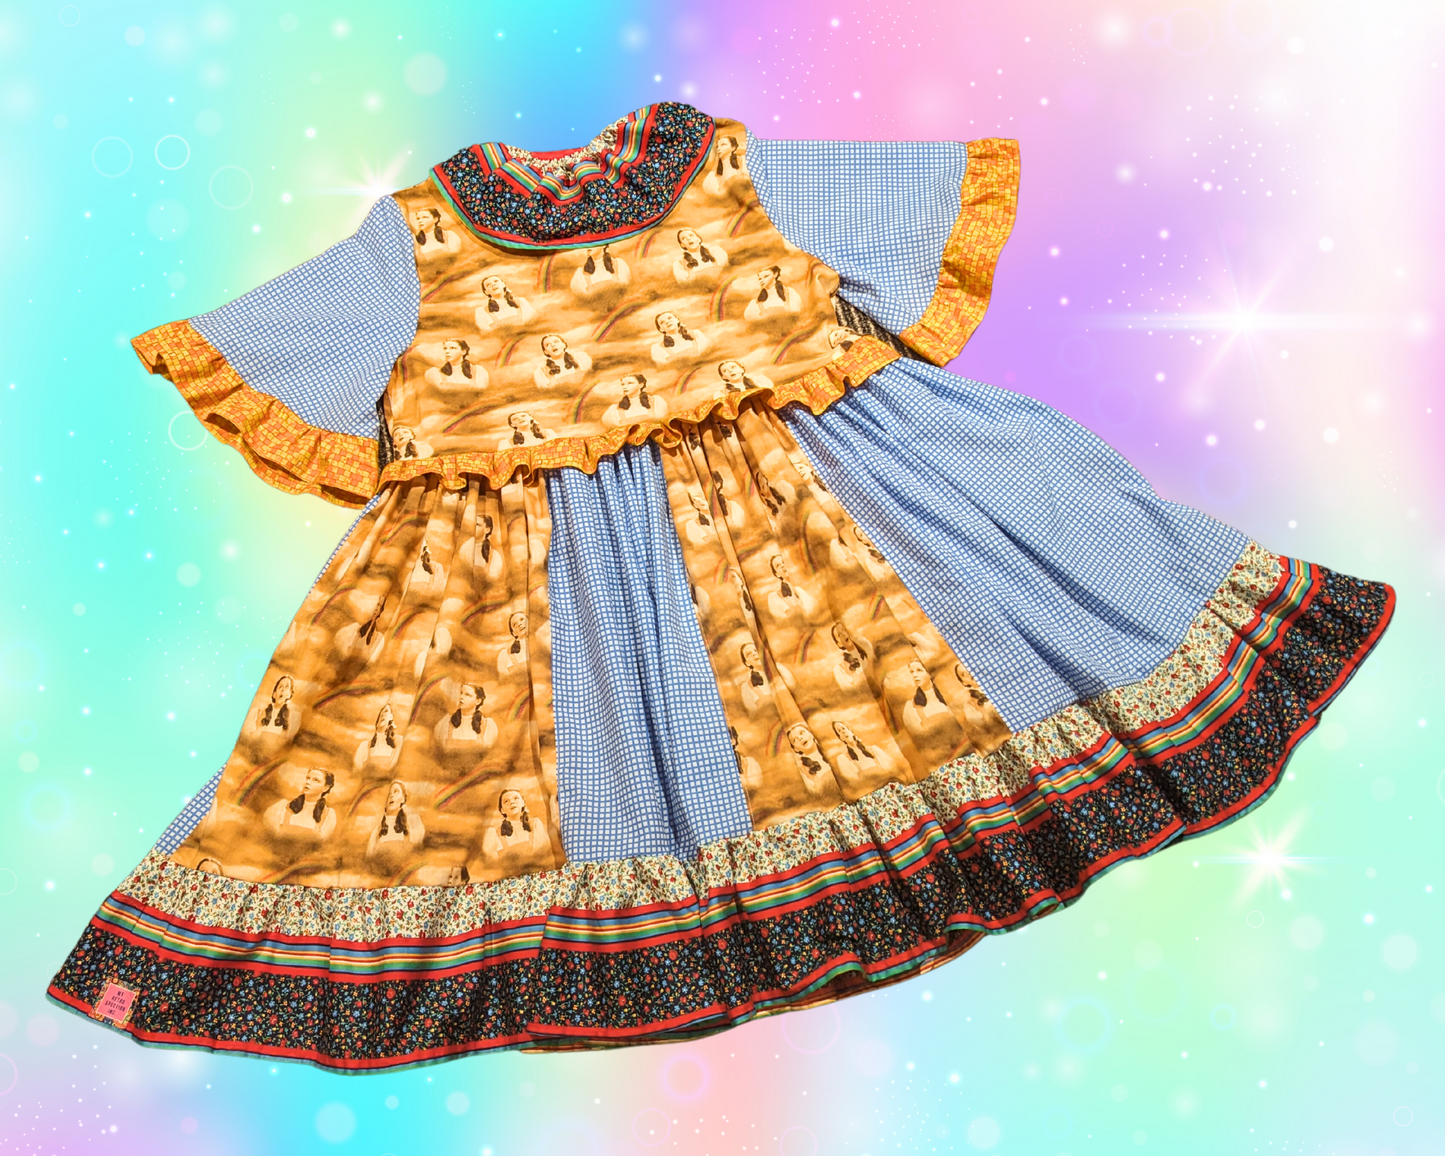 Handmade, Upcycled The Wizard of Oz Dress L-XL